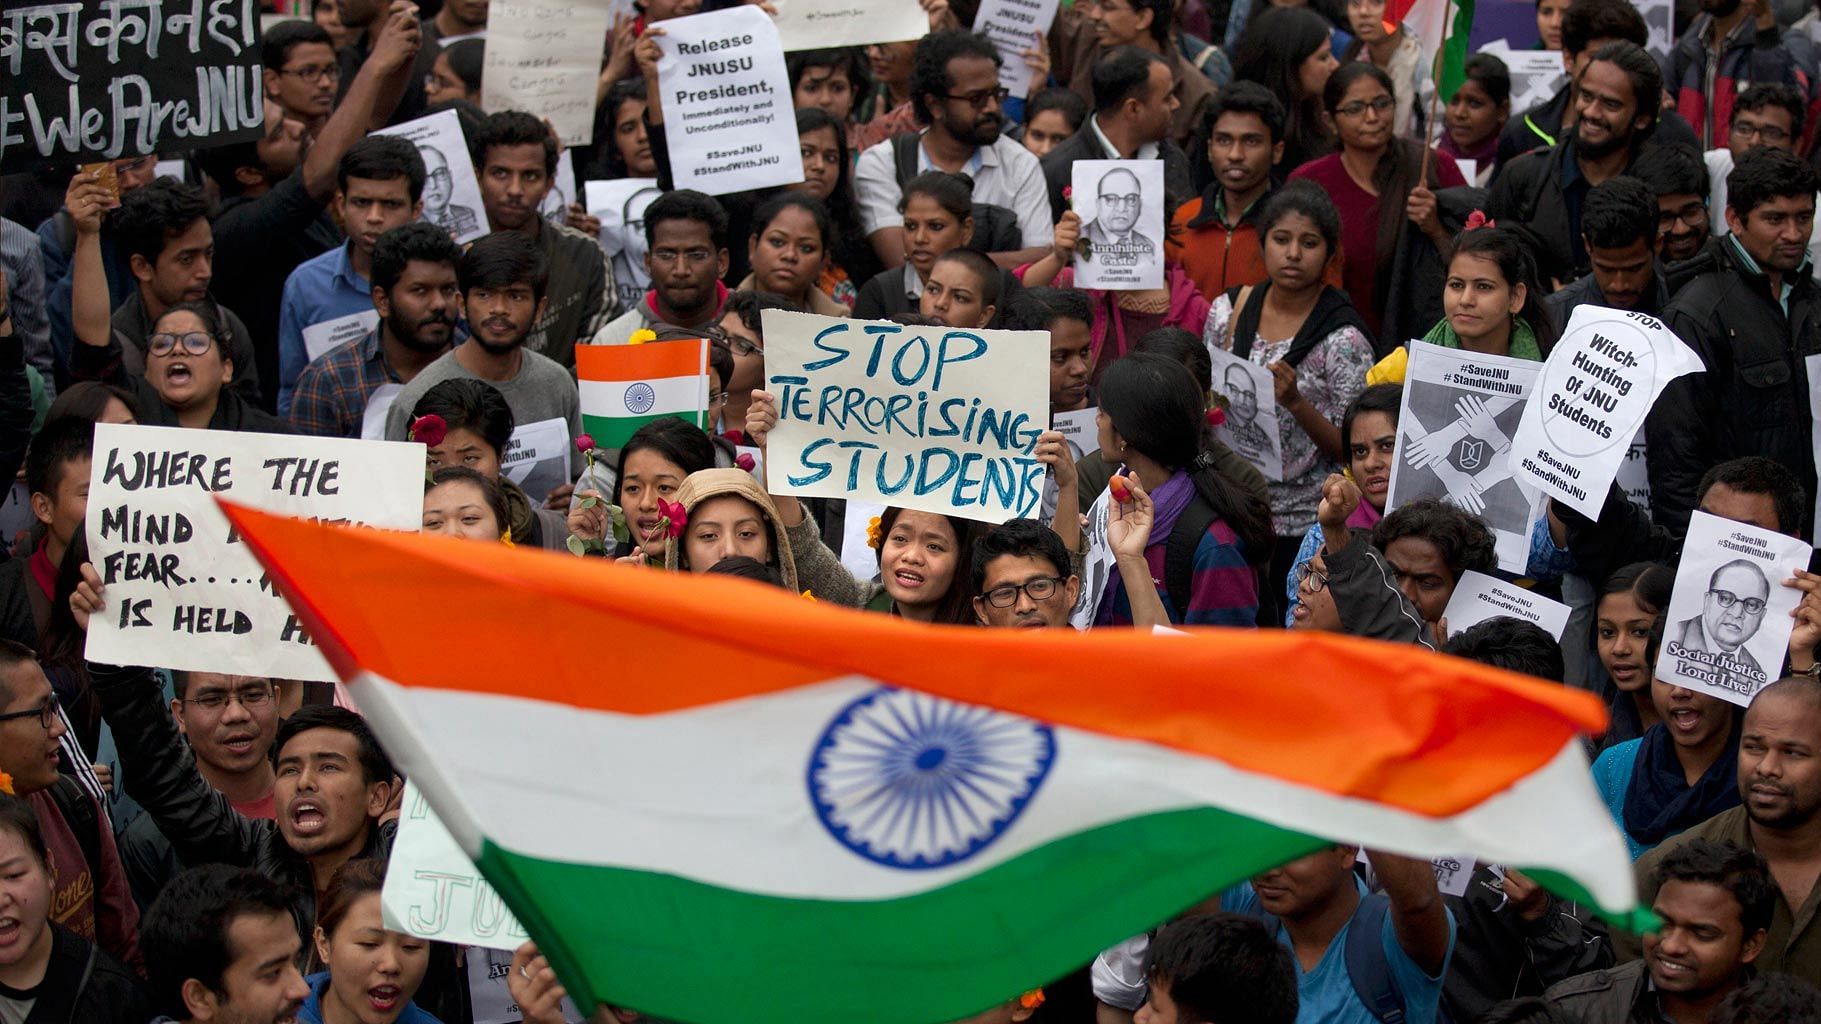 JNU students protest against the government crackdown on JNU in Delhi on Thursday, 18 February 2016